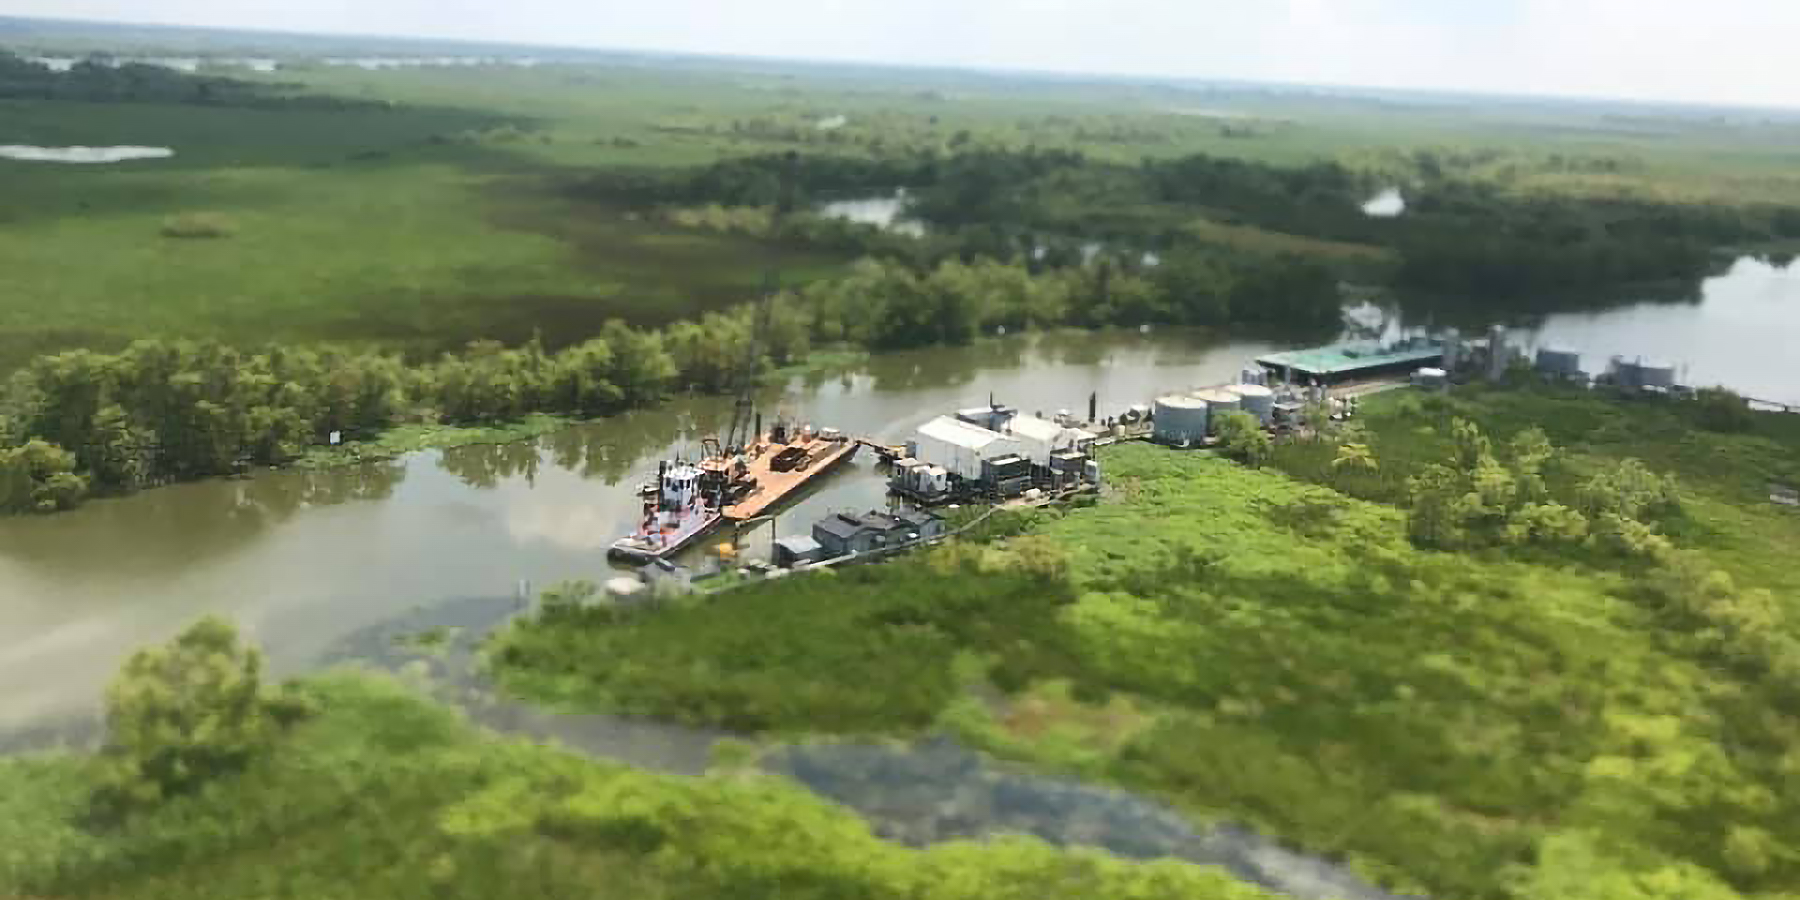 Rising sea levels and oil extraction are having devastating impact on the lowlands in Louisiana. Photo by Cindy Kohlmann.